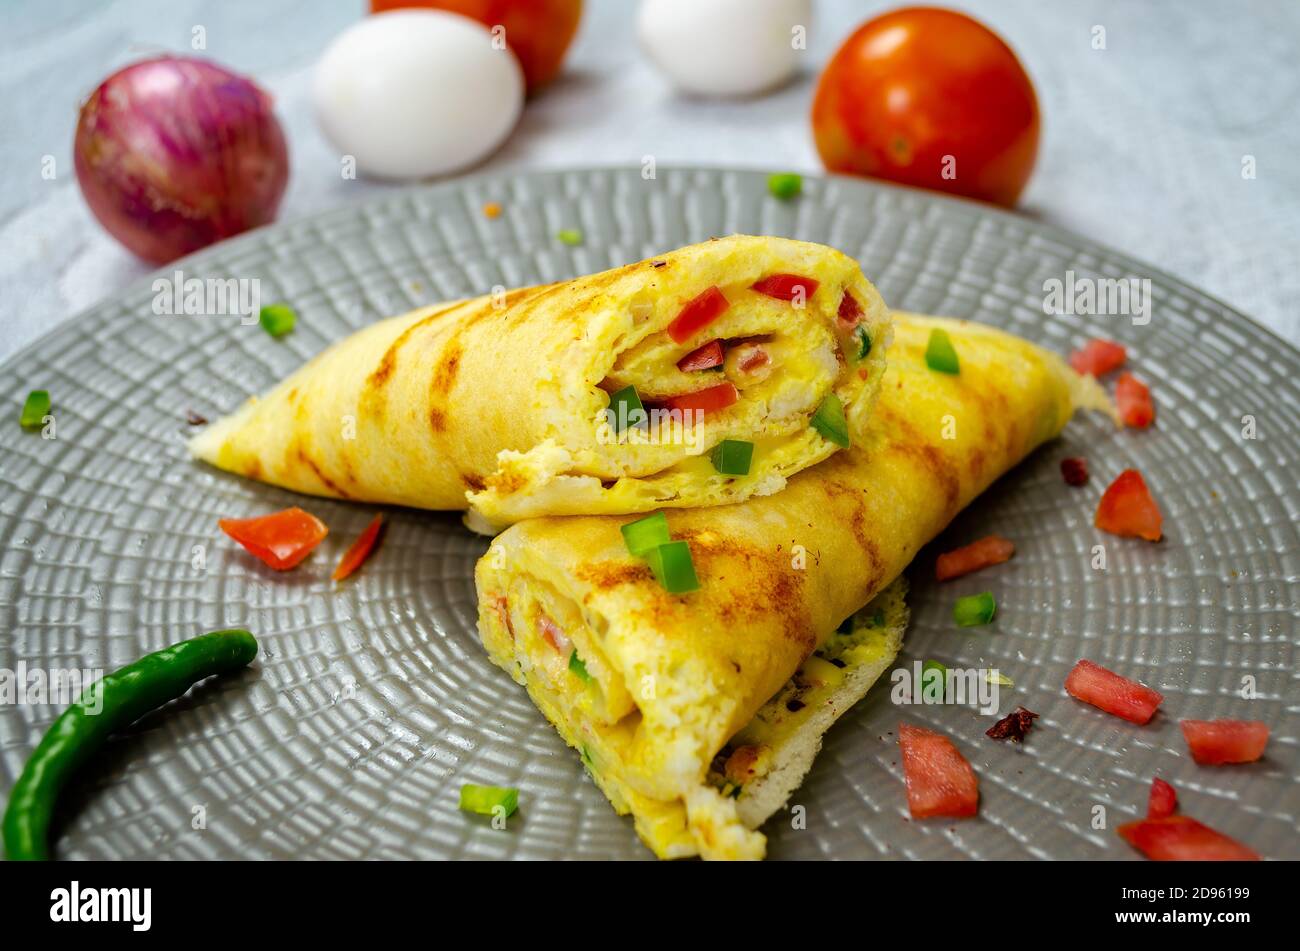 Half cut Egg Omelette Dosa in a plate with tomato, eggs & onions Stock Photo